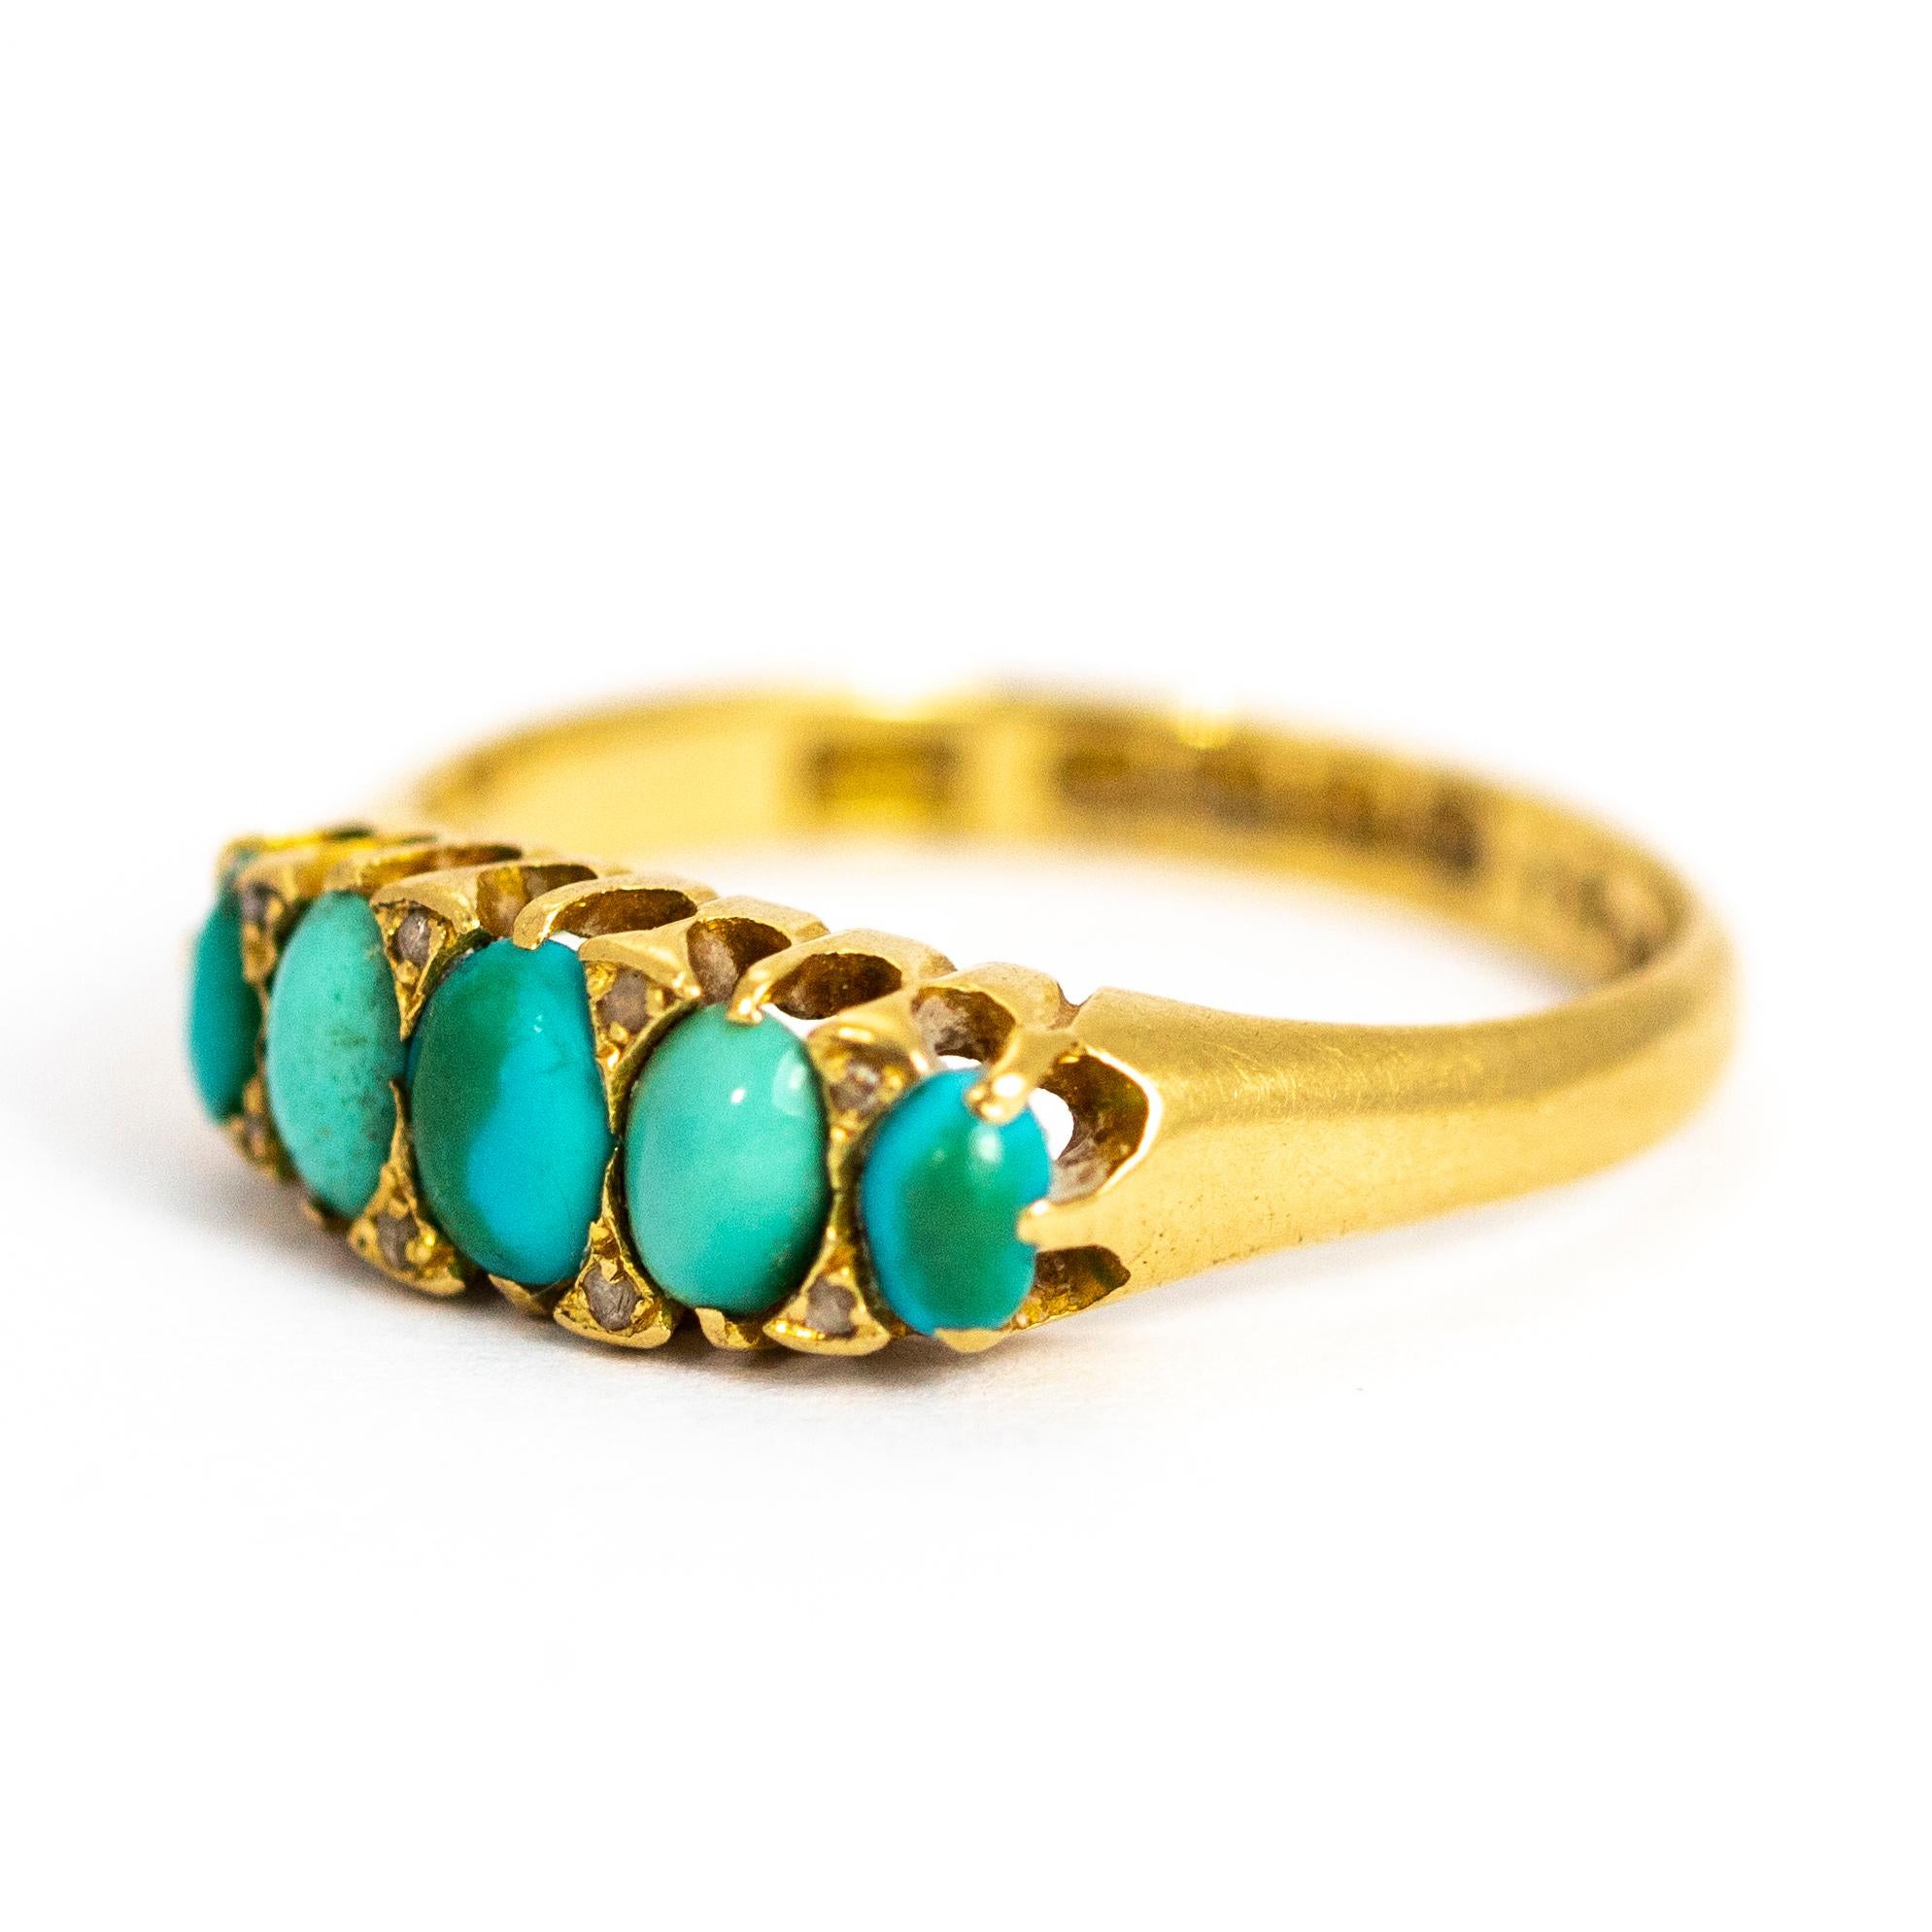 This wonderful turquoise five stone ring is modelled in 18ct gold and features eight small diamond points that sit between the oval turquoise stone cabochons. The band the stones sit ones quite chunky and very simple. Made in Birmingham, England.